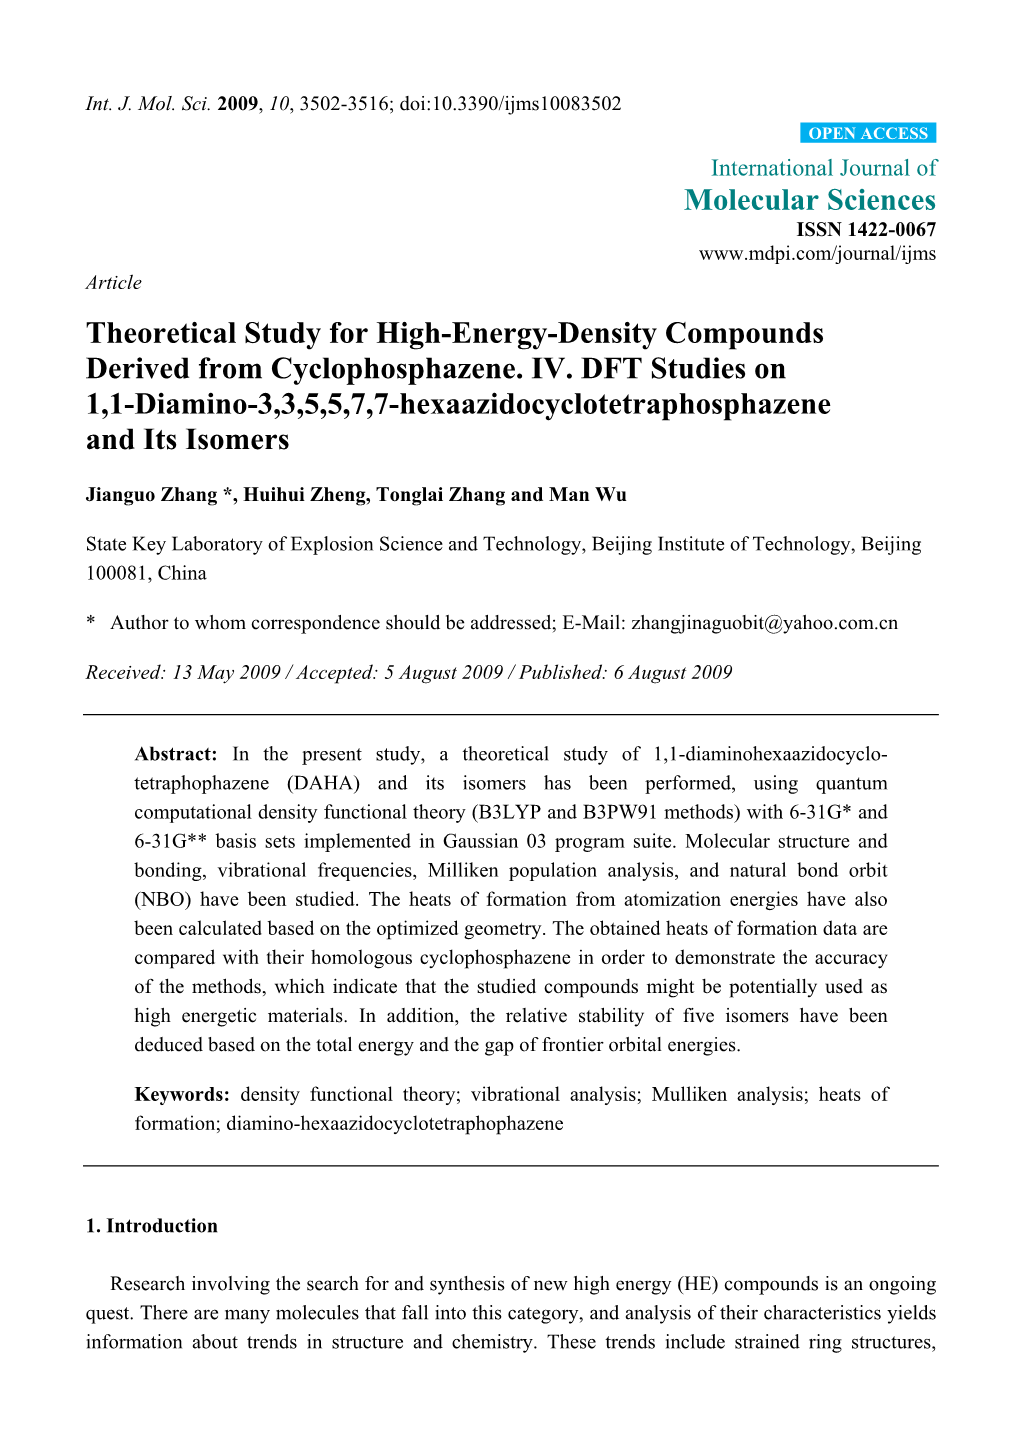 Theoretical Study for High-Energy-Density Compounds Derived from Cyclophosphazene